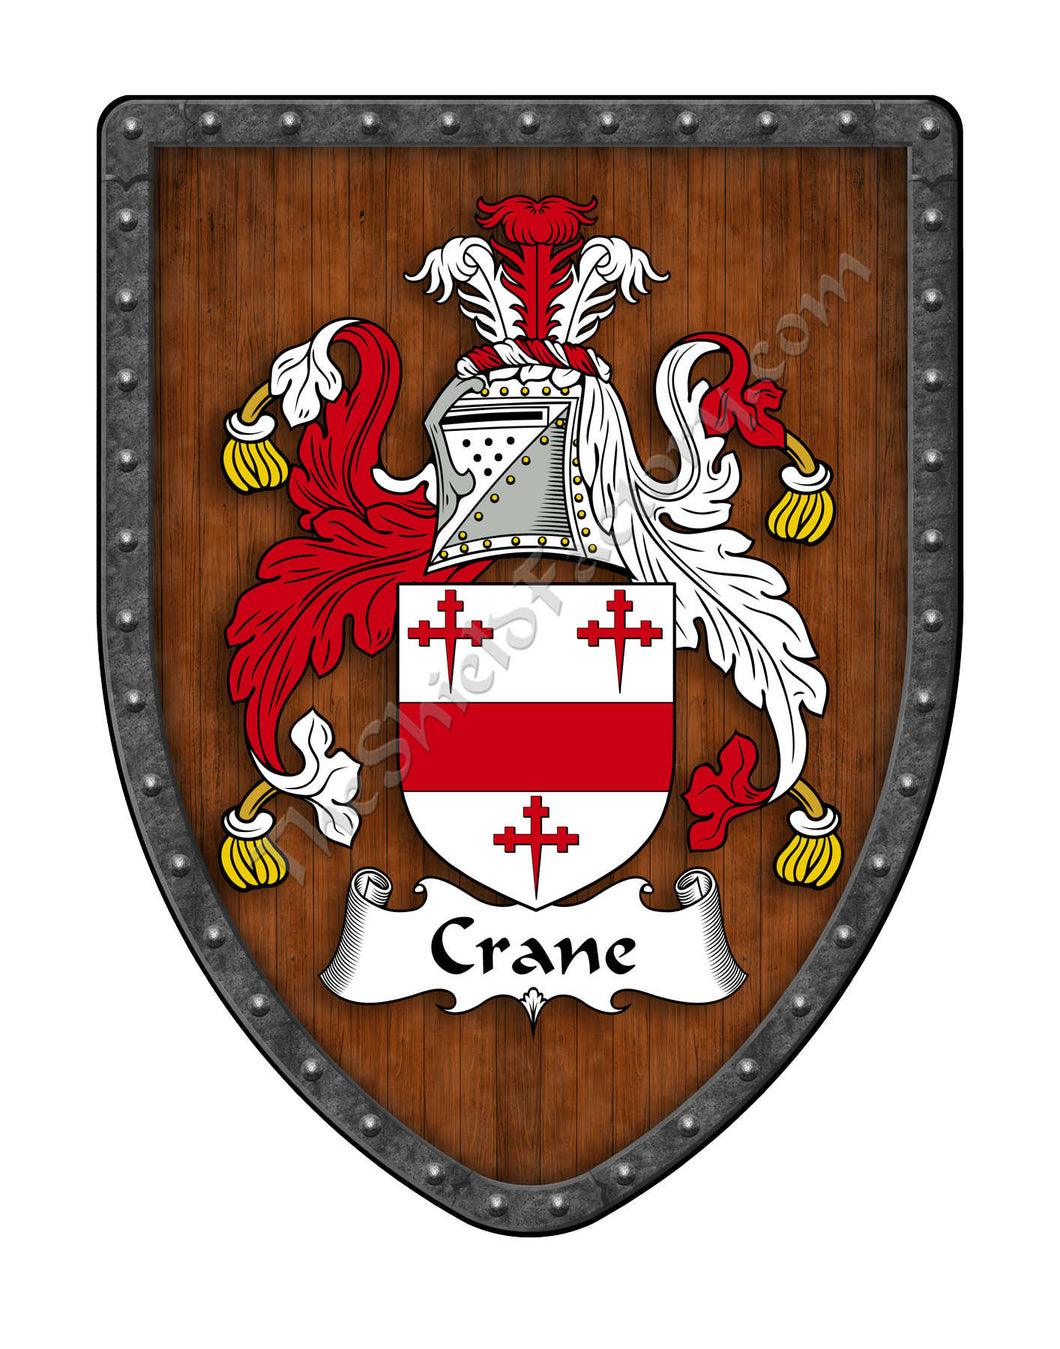 Crane II Coat of Arms Shield Family Crest